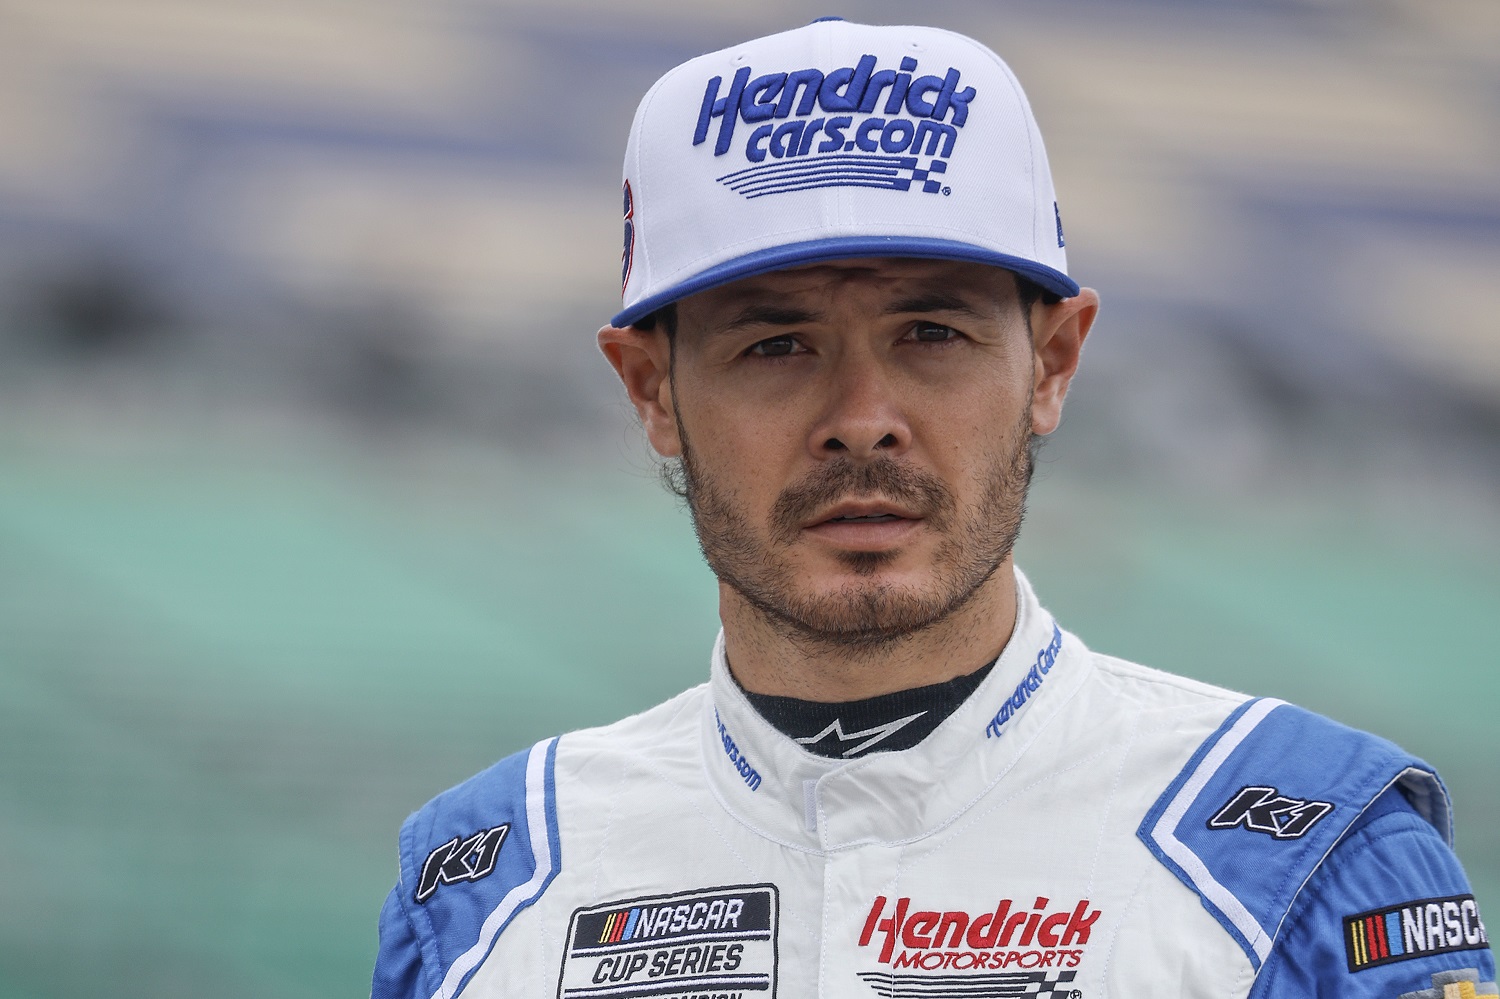 Kyle Larson walks the grid during practice for the NASCAR Cup Series Hollywood Casino 400 at Kansas Speedway on Sept. 10, 2022, in Kansas City, Kansas. | Chris Graythen/Getty Images